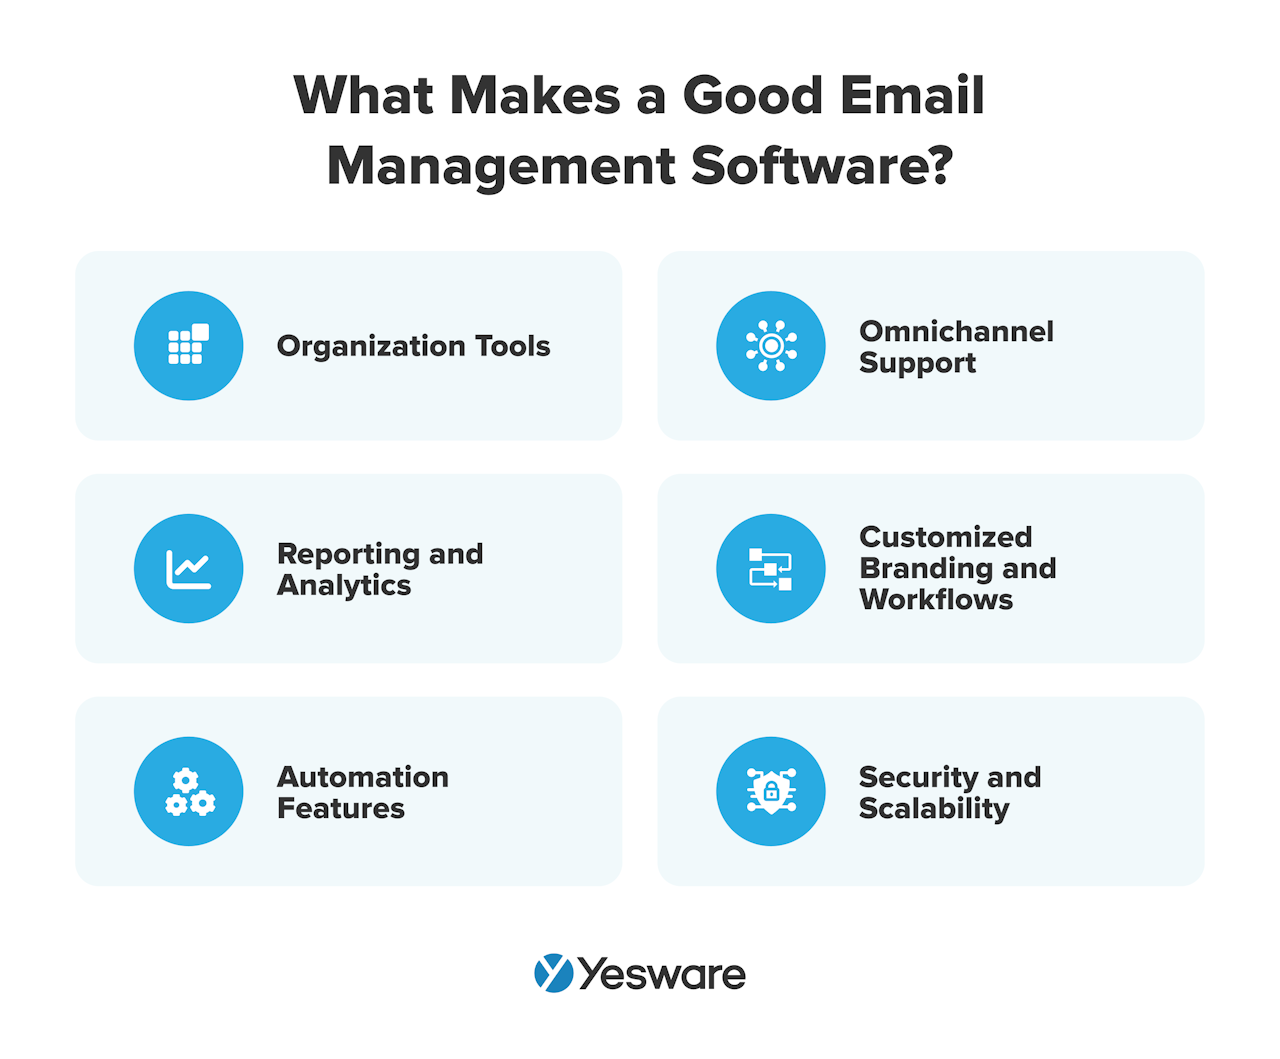 What makes a good email management software?